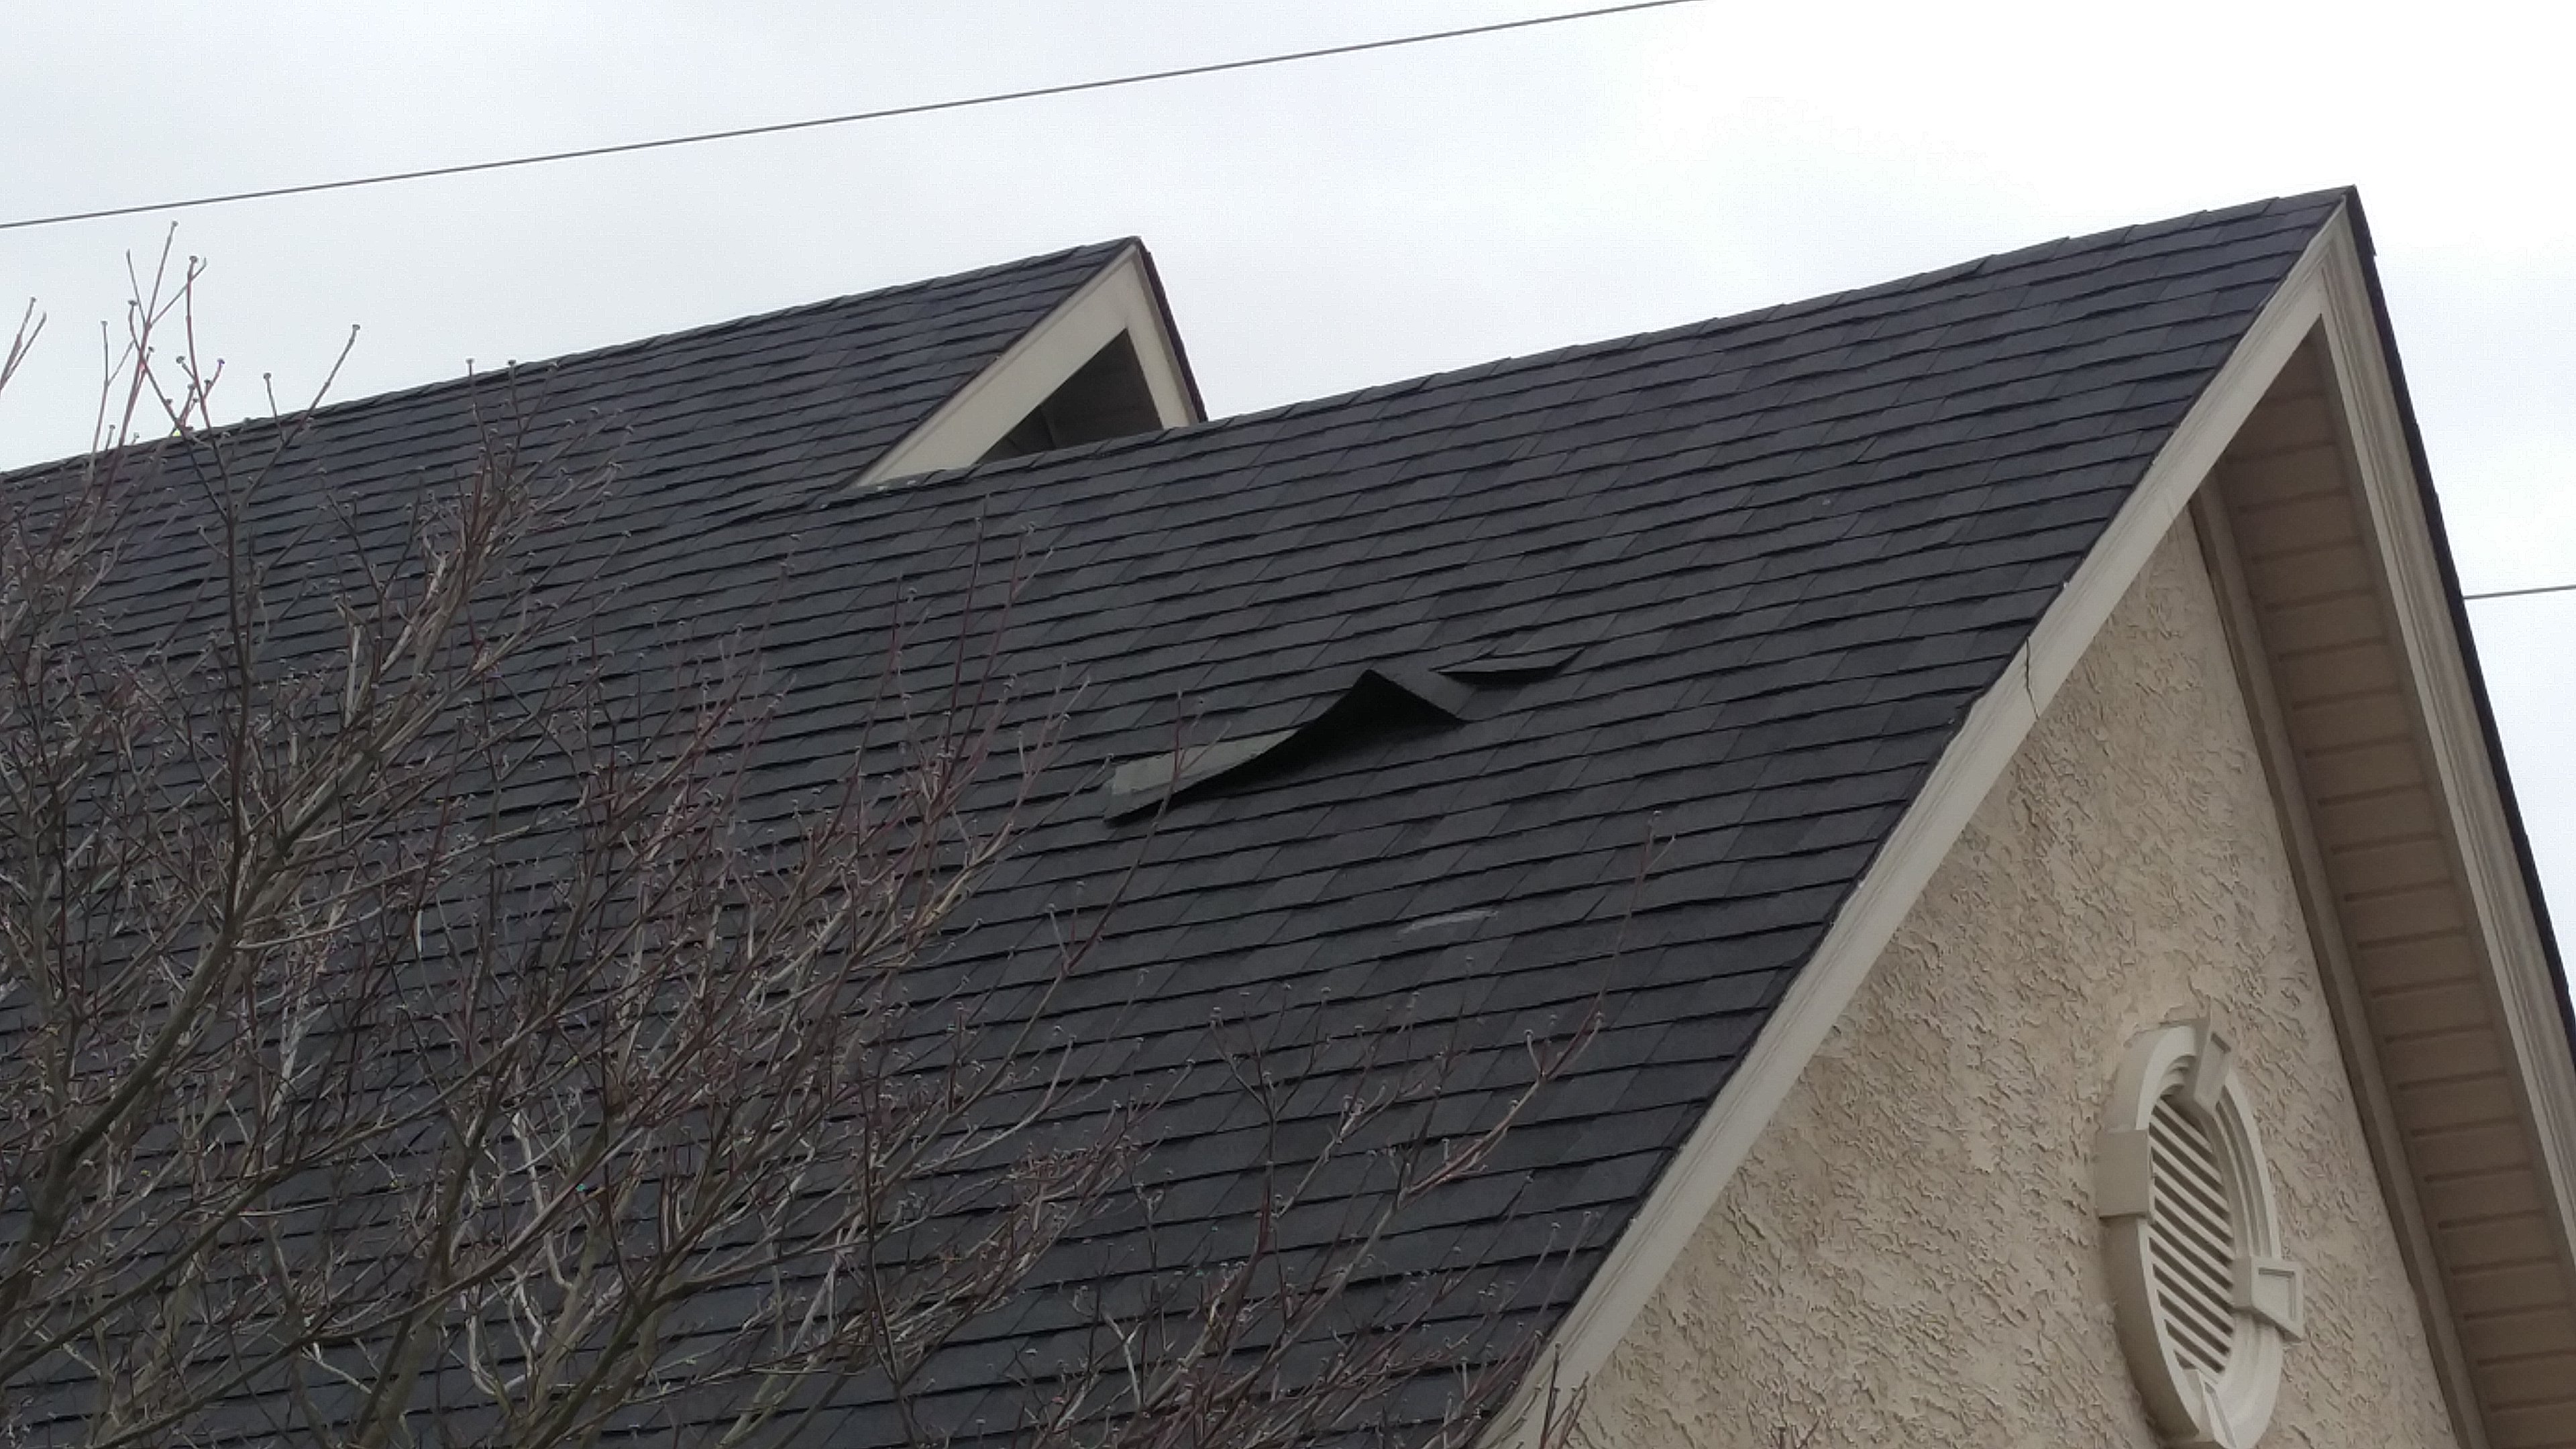 Bottom view of roof shingles falling off. It's only one month old and they are all very loose.